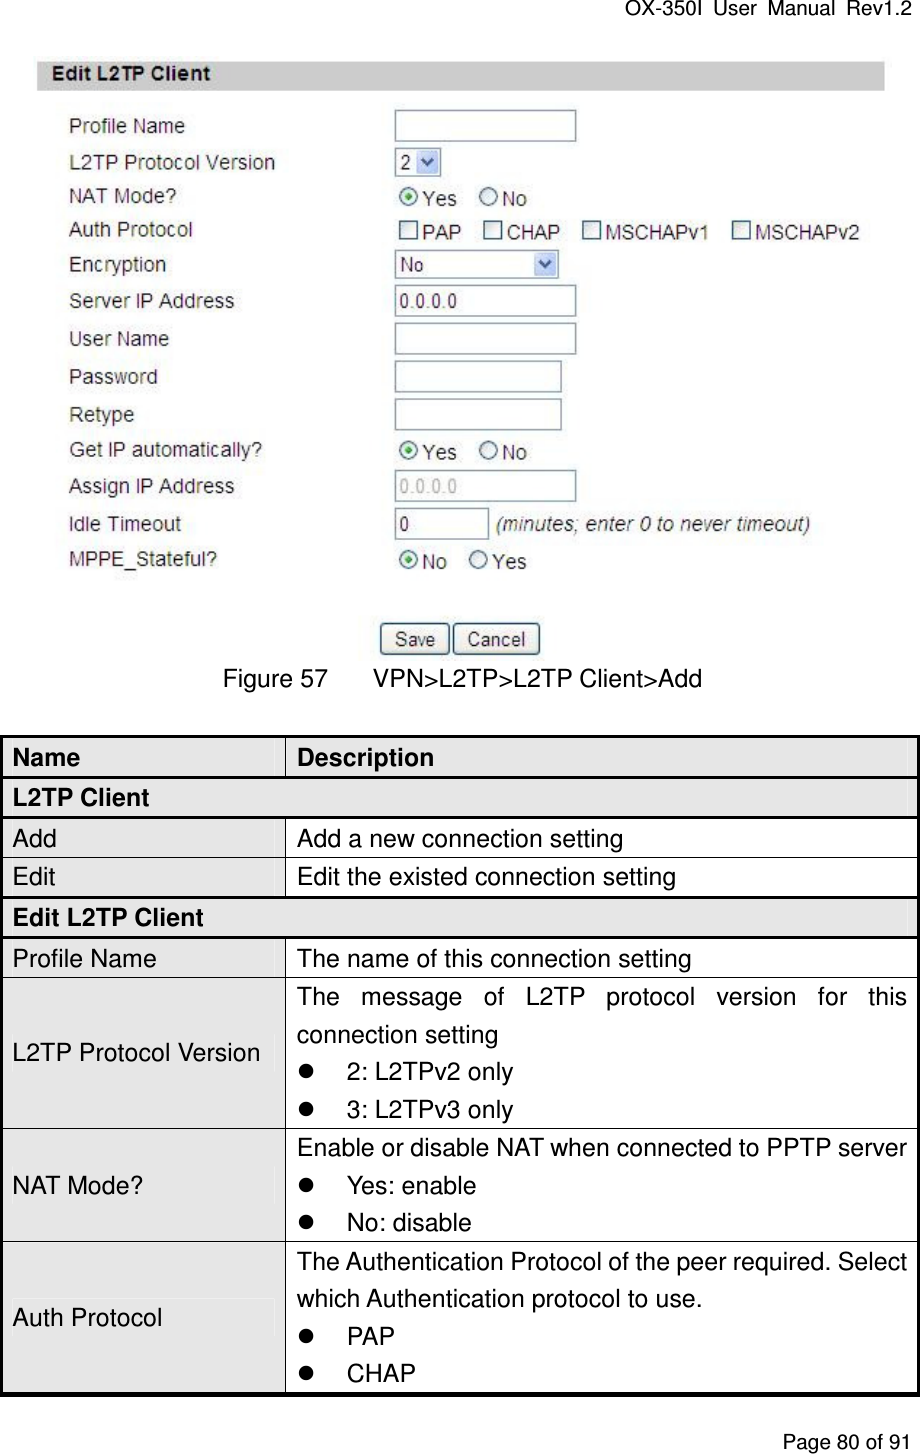 OX-350I  User  Manual  Rev1.2 Page 80 of 91  Figure 57  VPN&gt;L2TP&gt;L2TP Client&gt;Add Name  Description L2TP Client Add  Add a new connection setting Edit  Edit the existed connection setting Edit L2TP Client Profile Name  The name of this connection setting L2TP Protocol Version The  message  of  L2TP  protocol  version  for  this connection setting   2: L2TPv2 only   3: L2TPv3 only   NAT Mode? Enable or disable NAT when connected to PPTP server   Yes: enable   No: disable Auth Protocol The Authentication Protocol of the peer required. Select which Authentication protocol to use.   PAP   CHAP 